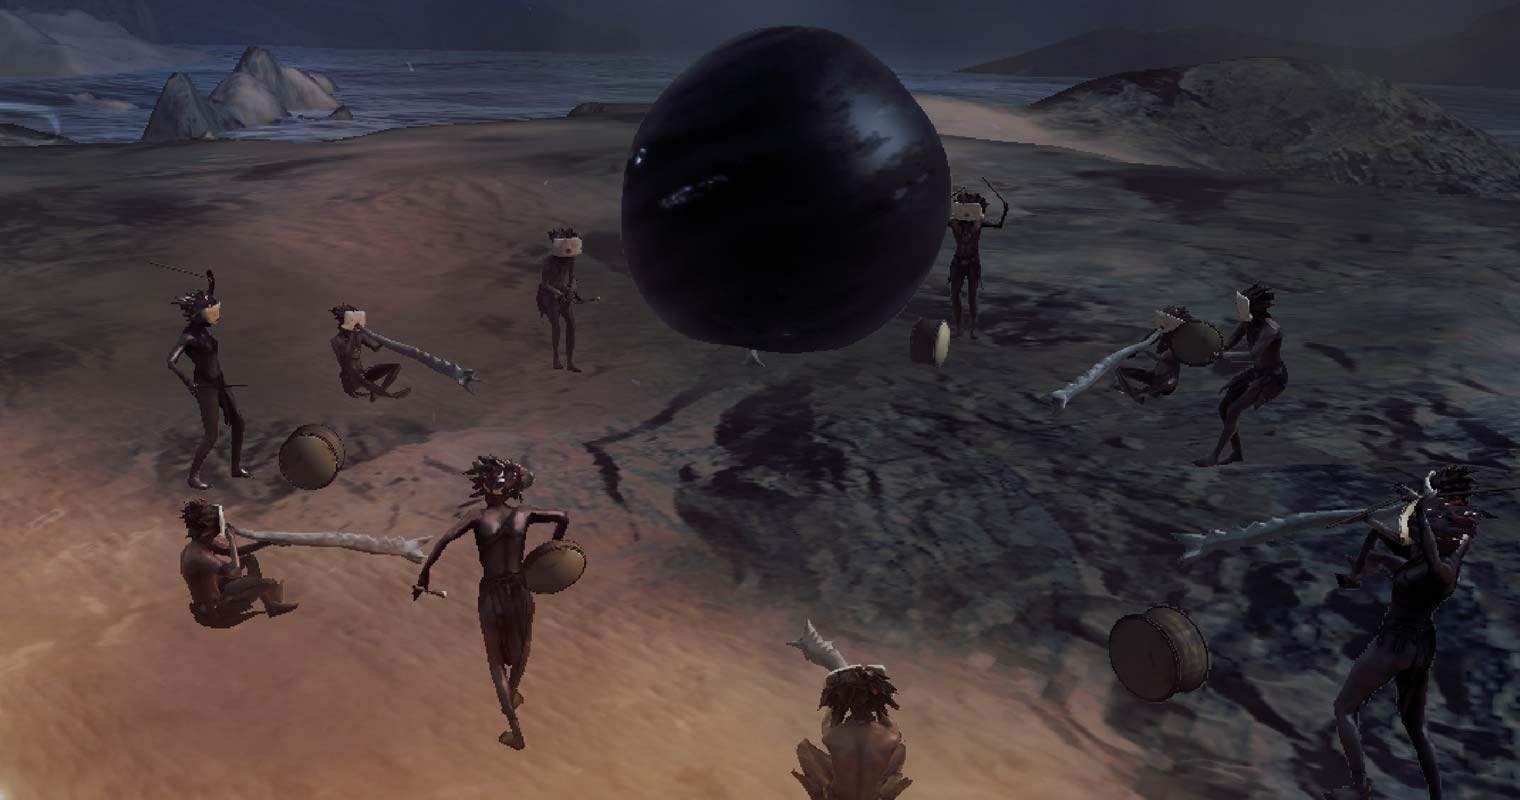 Screenshot from the game From Dust. A tribe chants around a floating black orb.